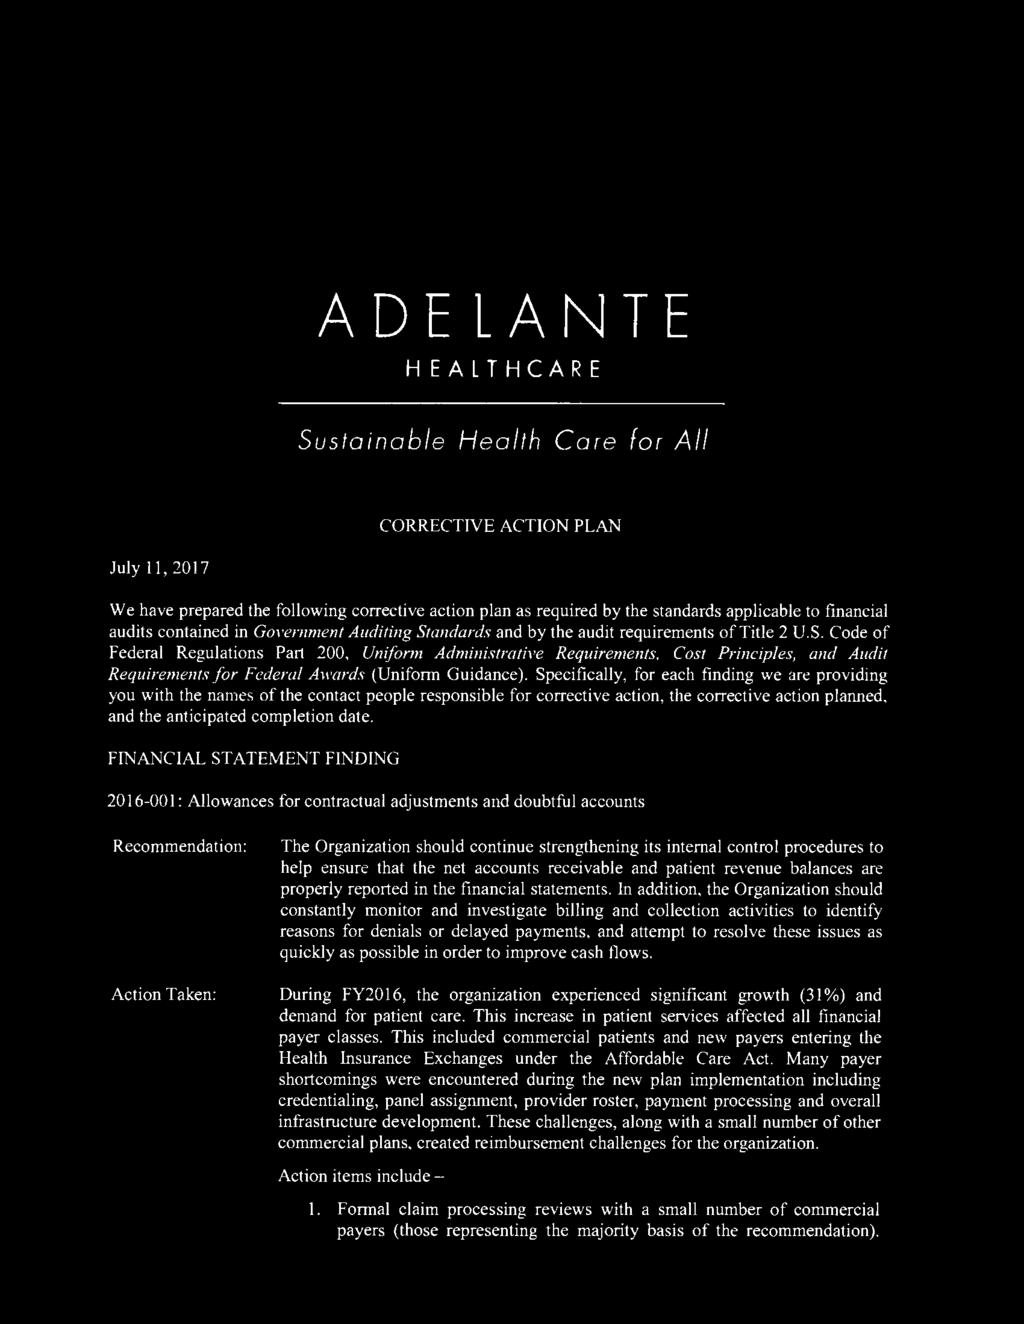 ADELANTE HEAlTHCARE Sustainable Health Core for All CORRECTIVE ACTION PLAN July 11,2017 We have prepared the following corrective action plan as required by the standards applicable to financial